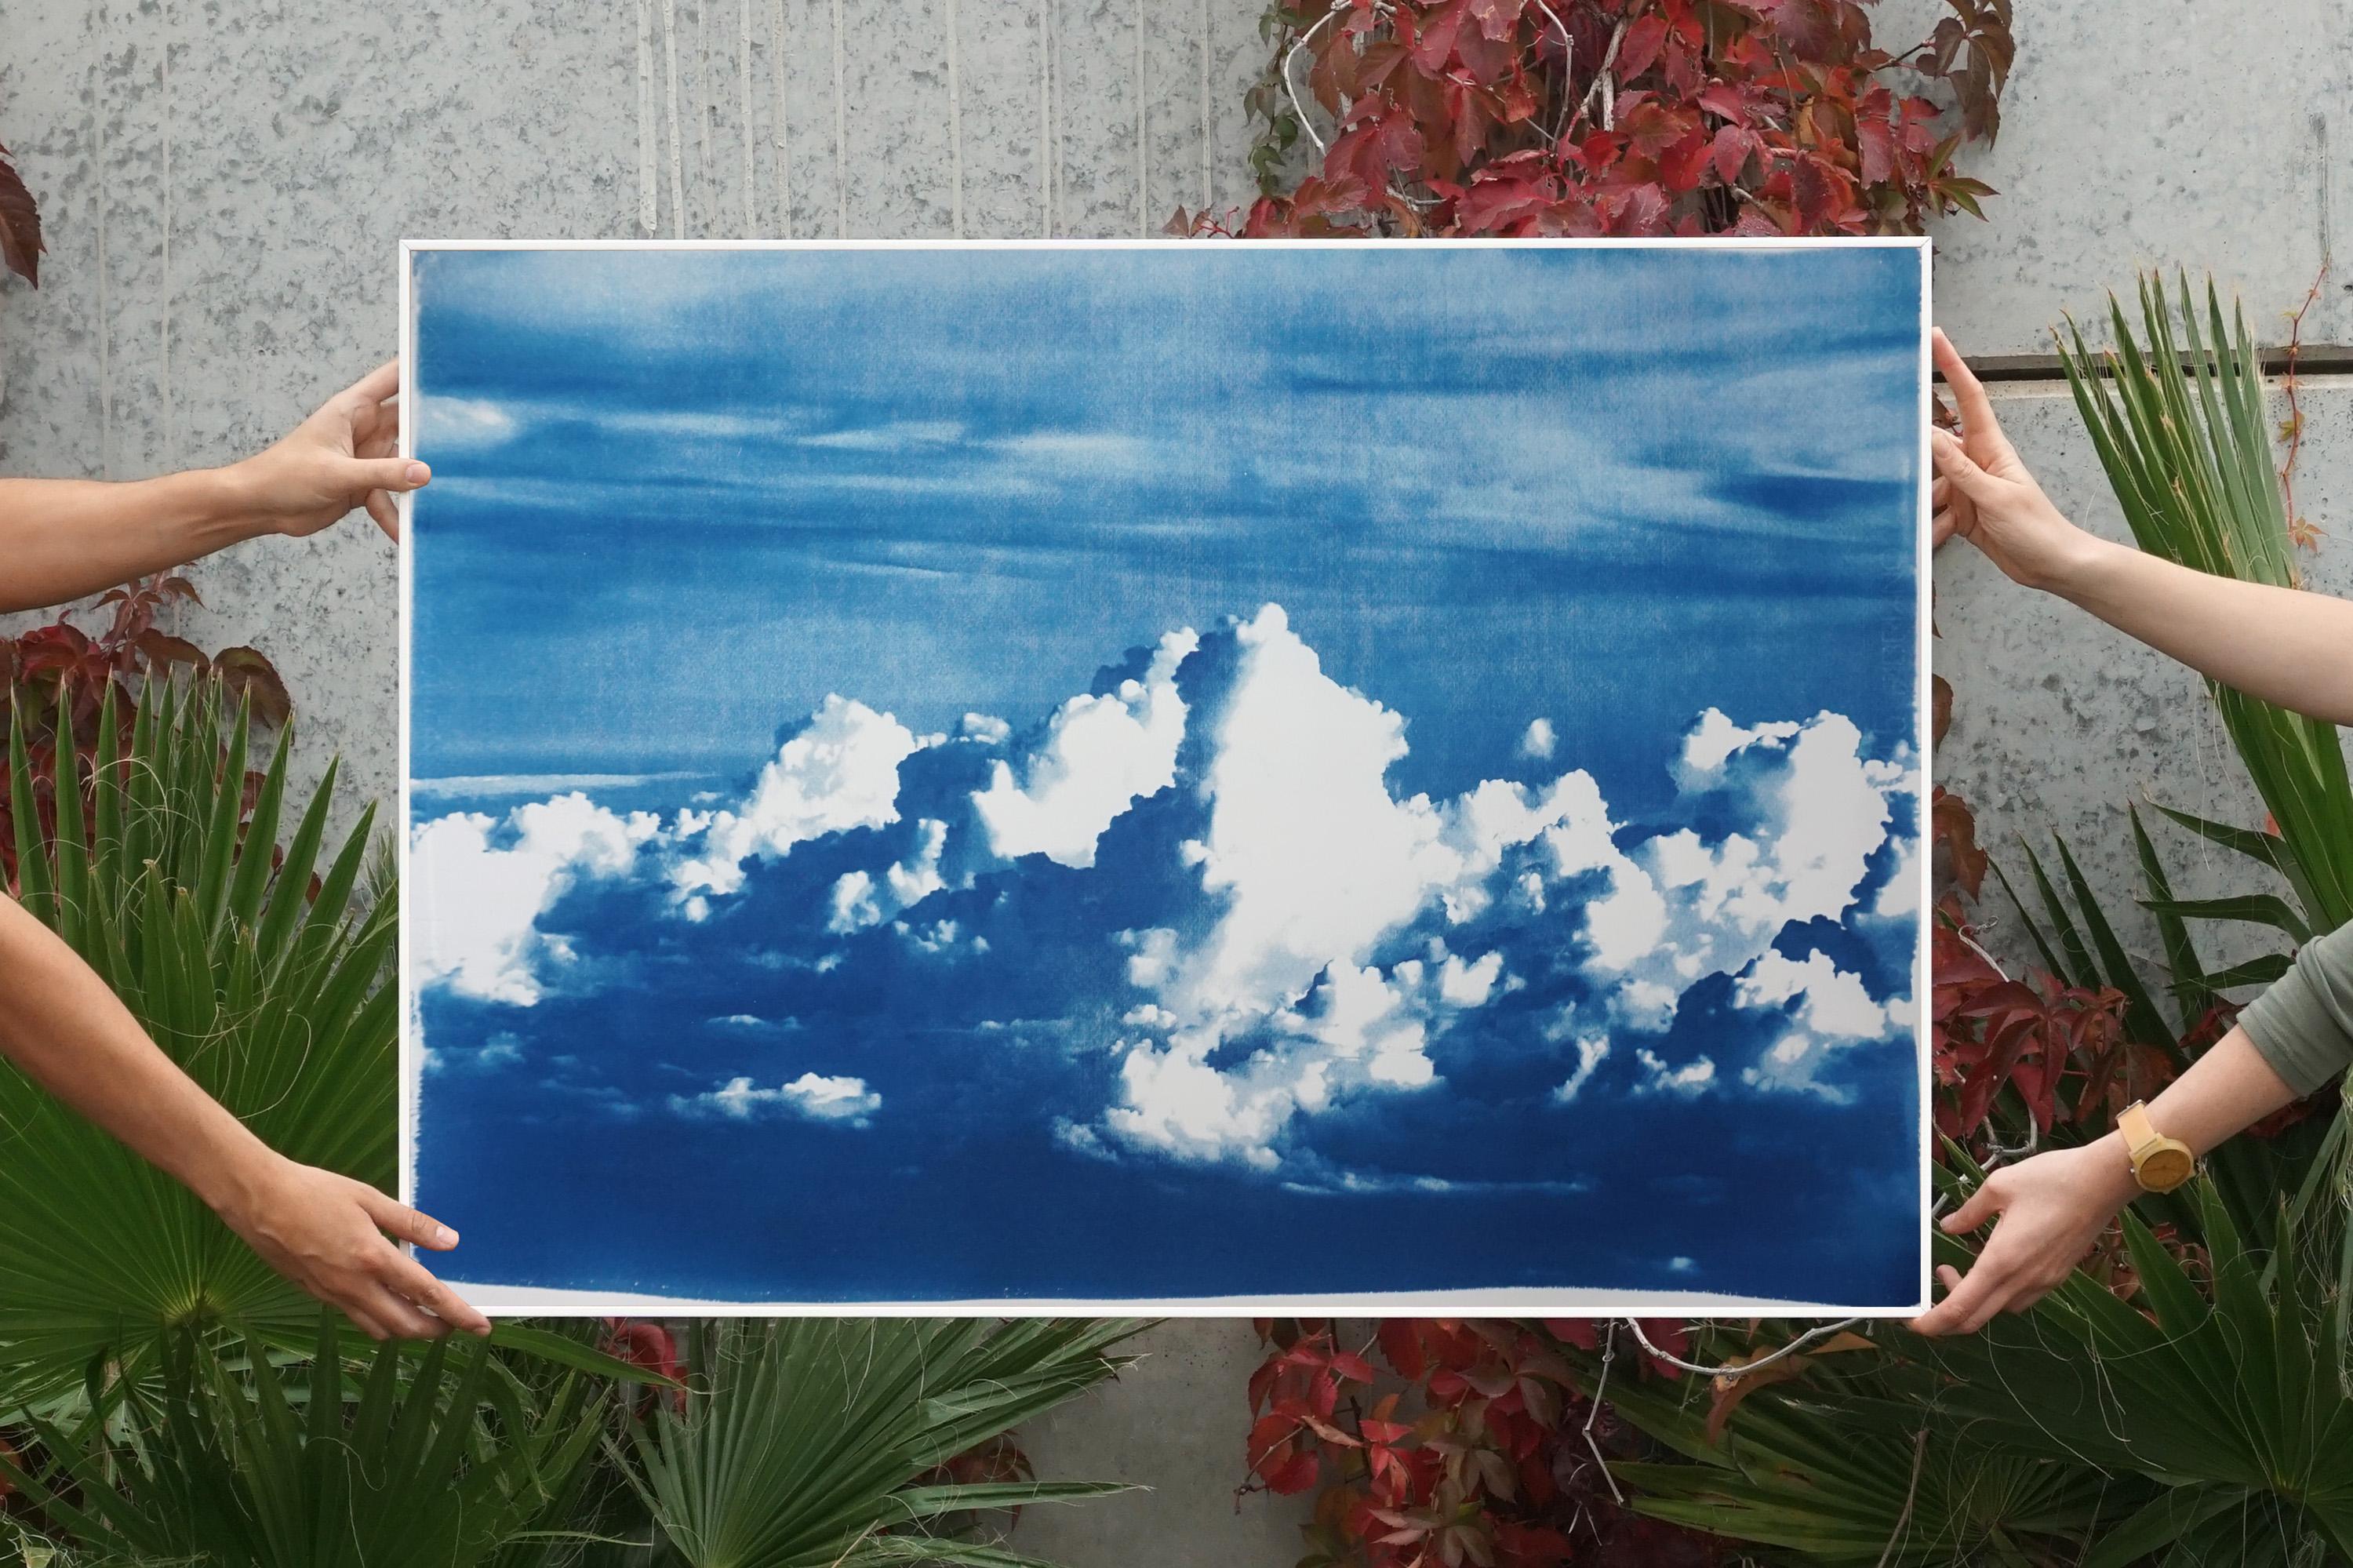 Blustery Clouds After a Storm, Sky Blue Handprinted Cyanotype, Meaningful Scene 4